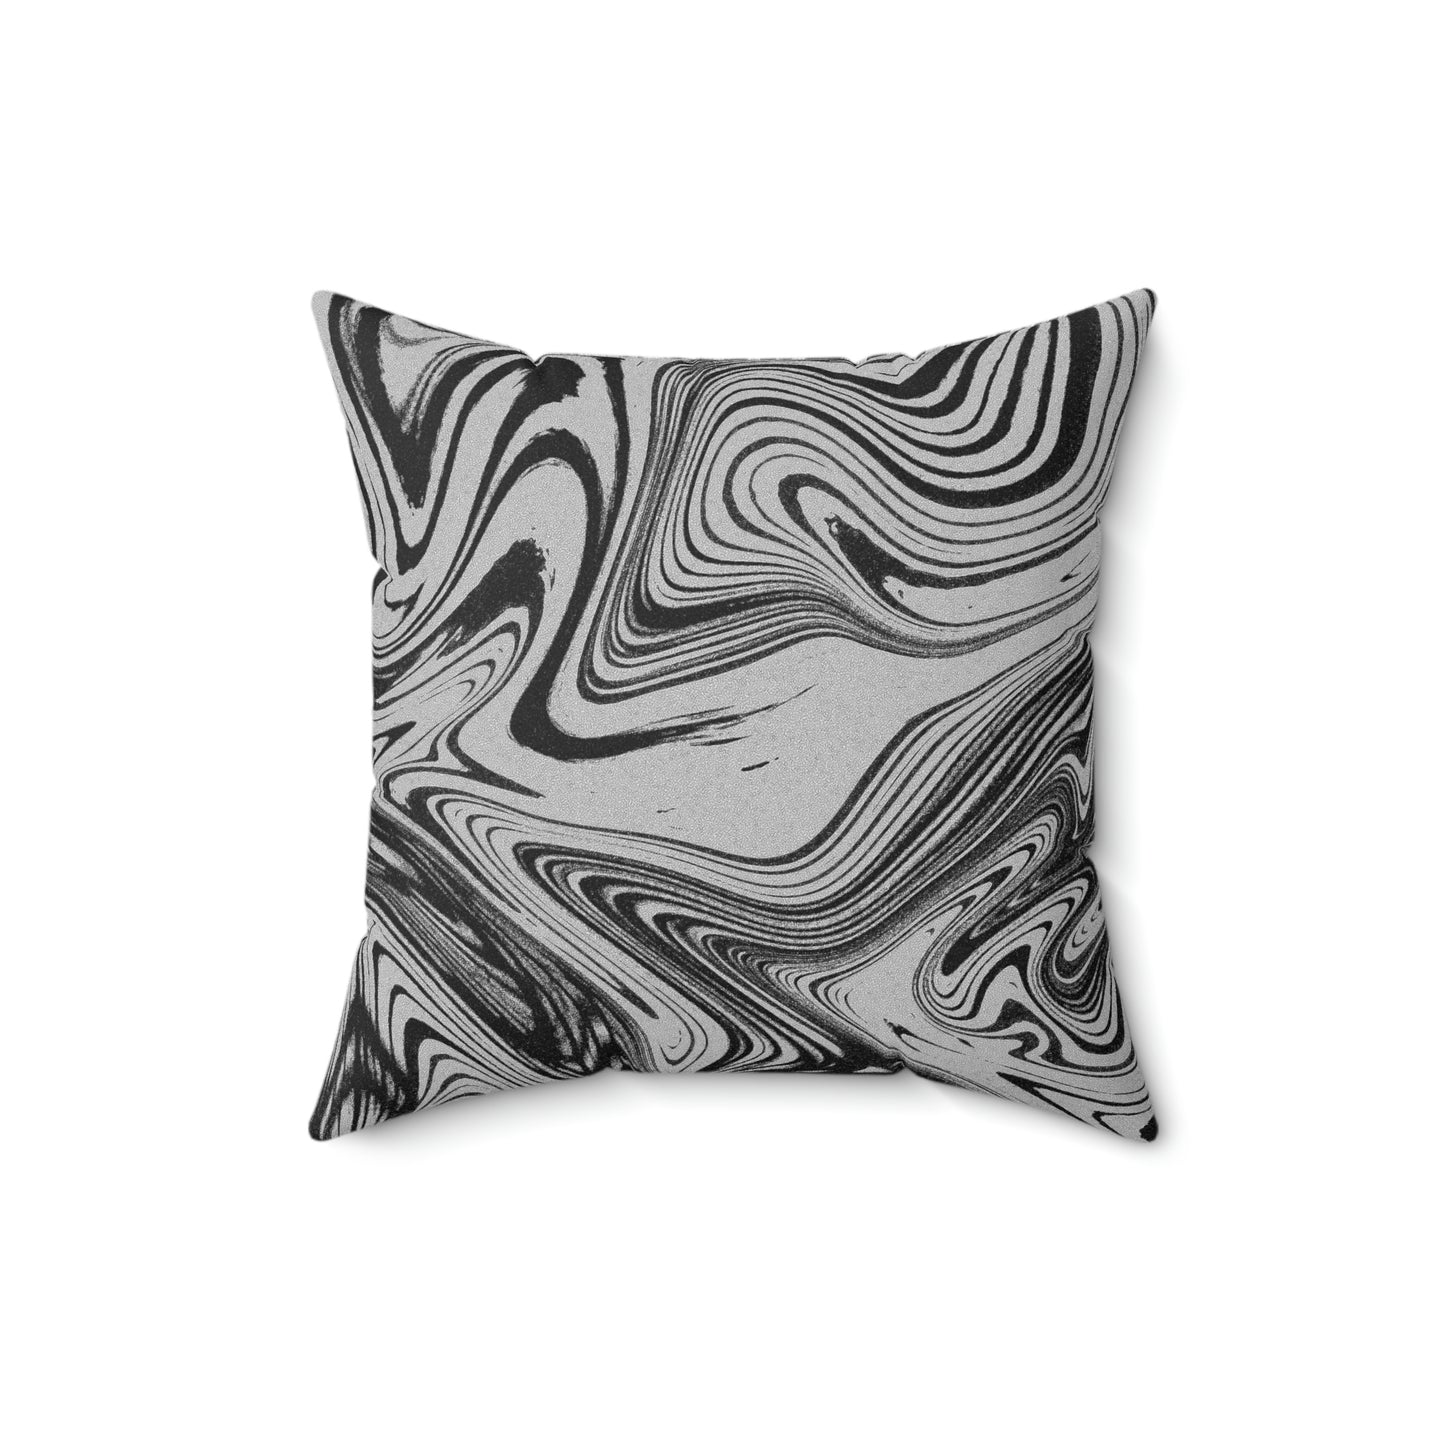 Groovy Monochrome Cover & Pillow (4 Sizes)